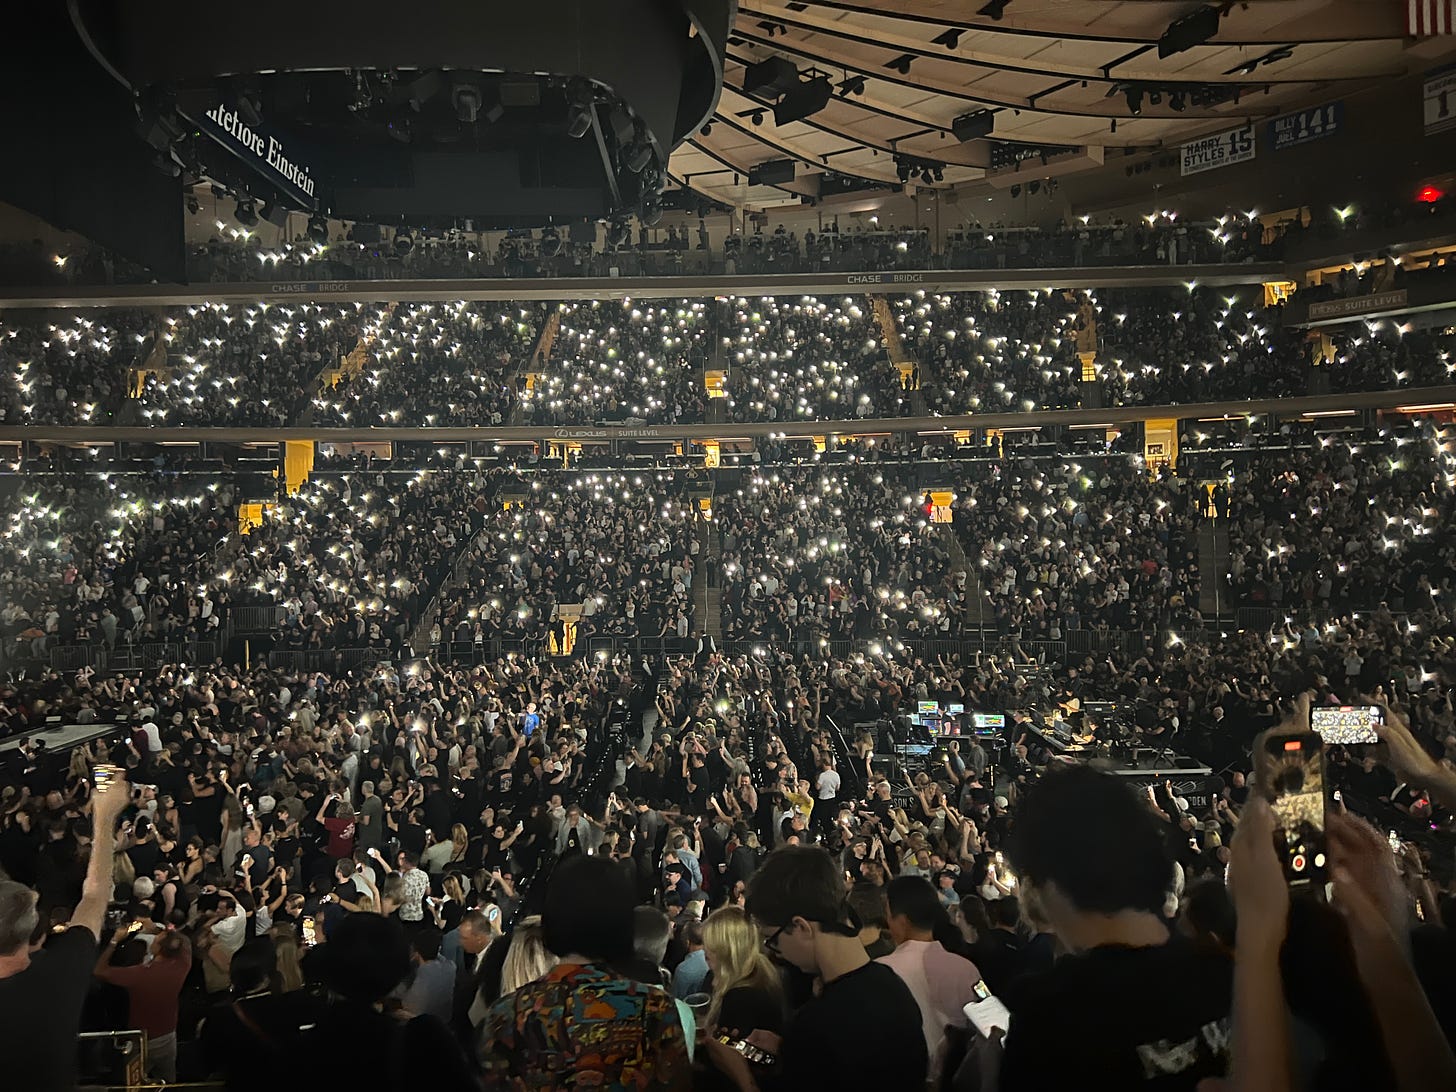 Madison Square Garden crowd after Depeche Mode show lit up by cellphones. 